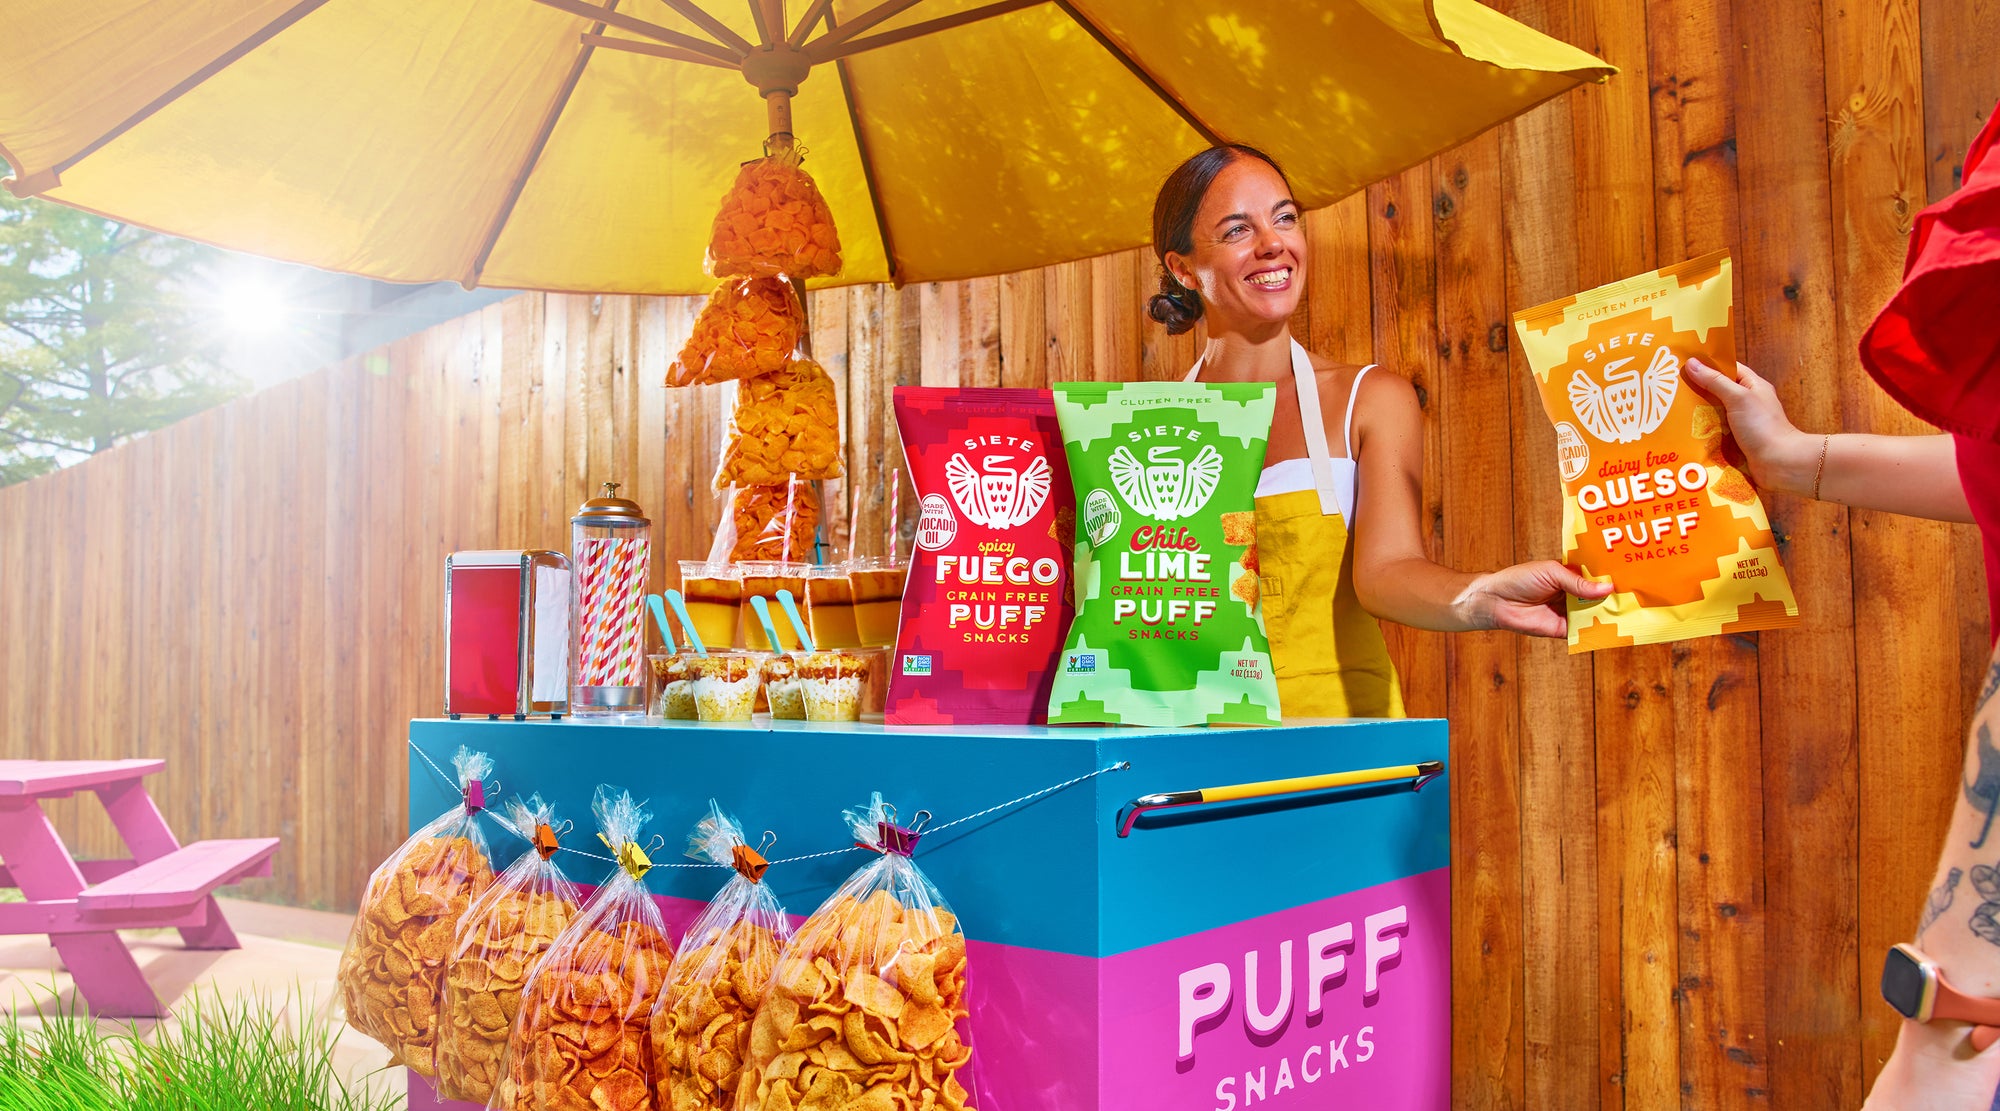 INTRODUCING OUR NEW LINE OF GRAIN FREE PUFF SNACKS!